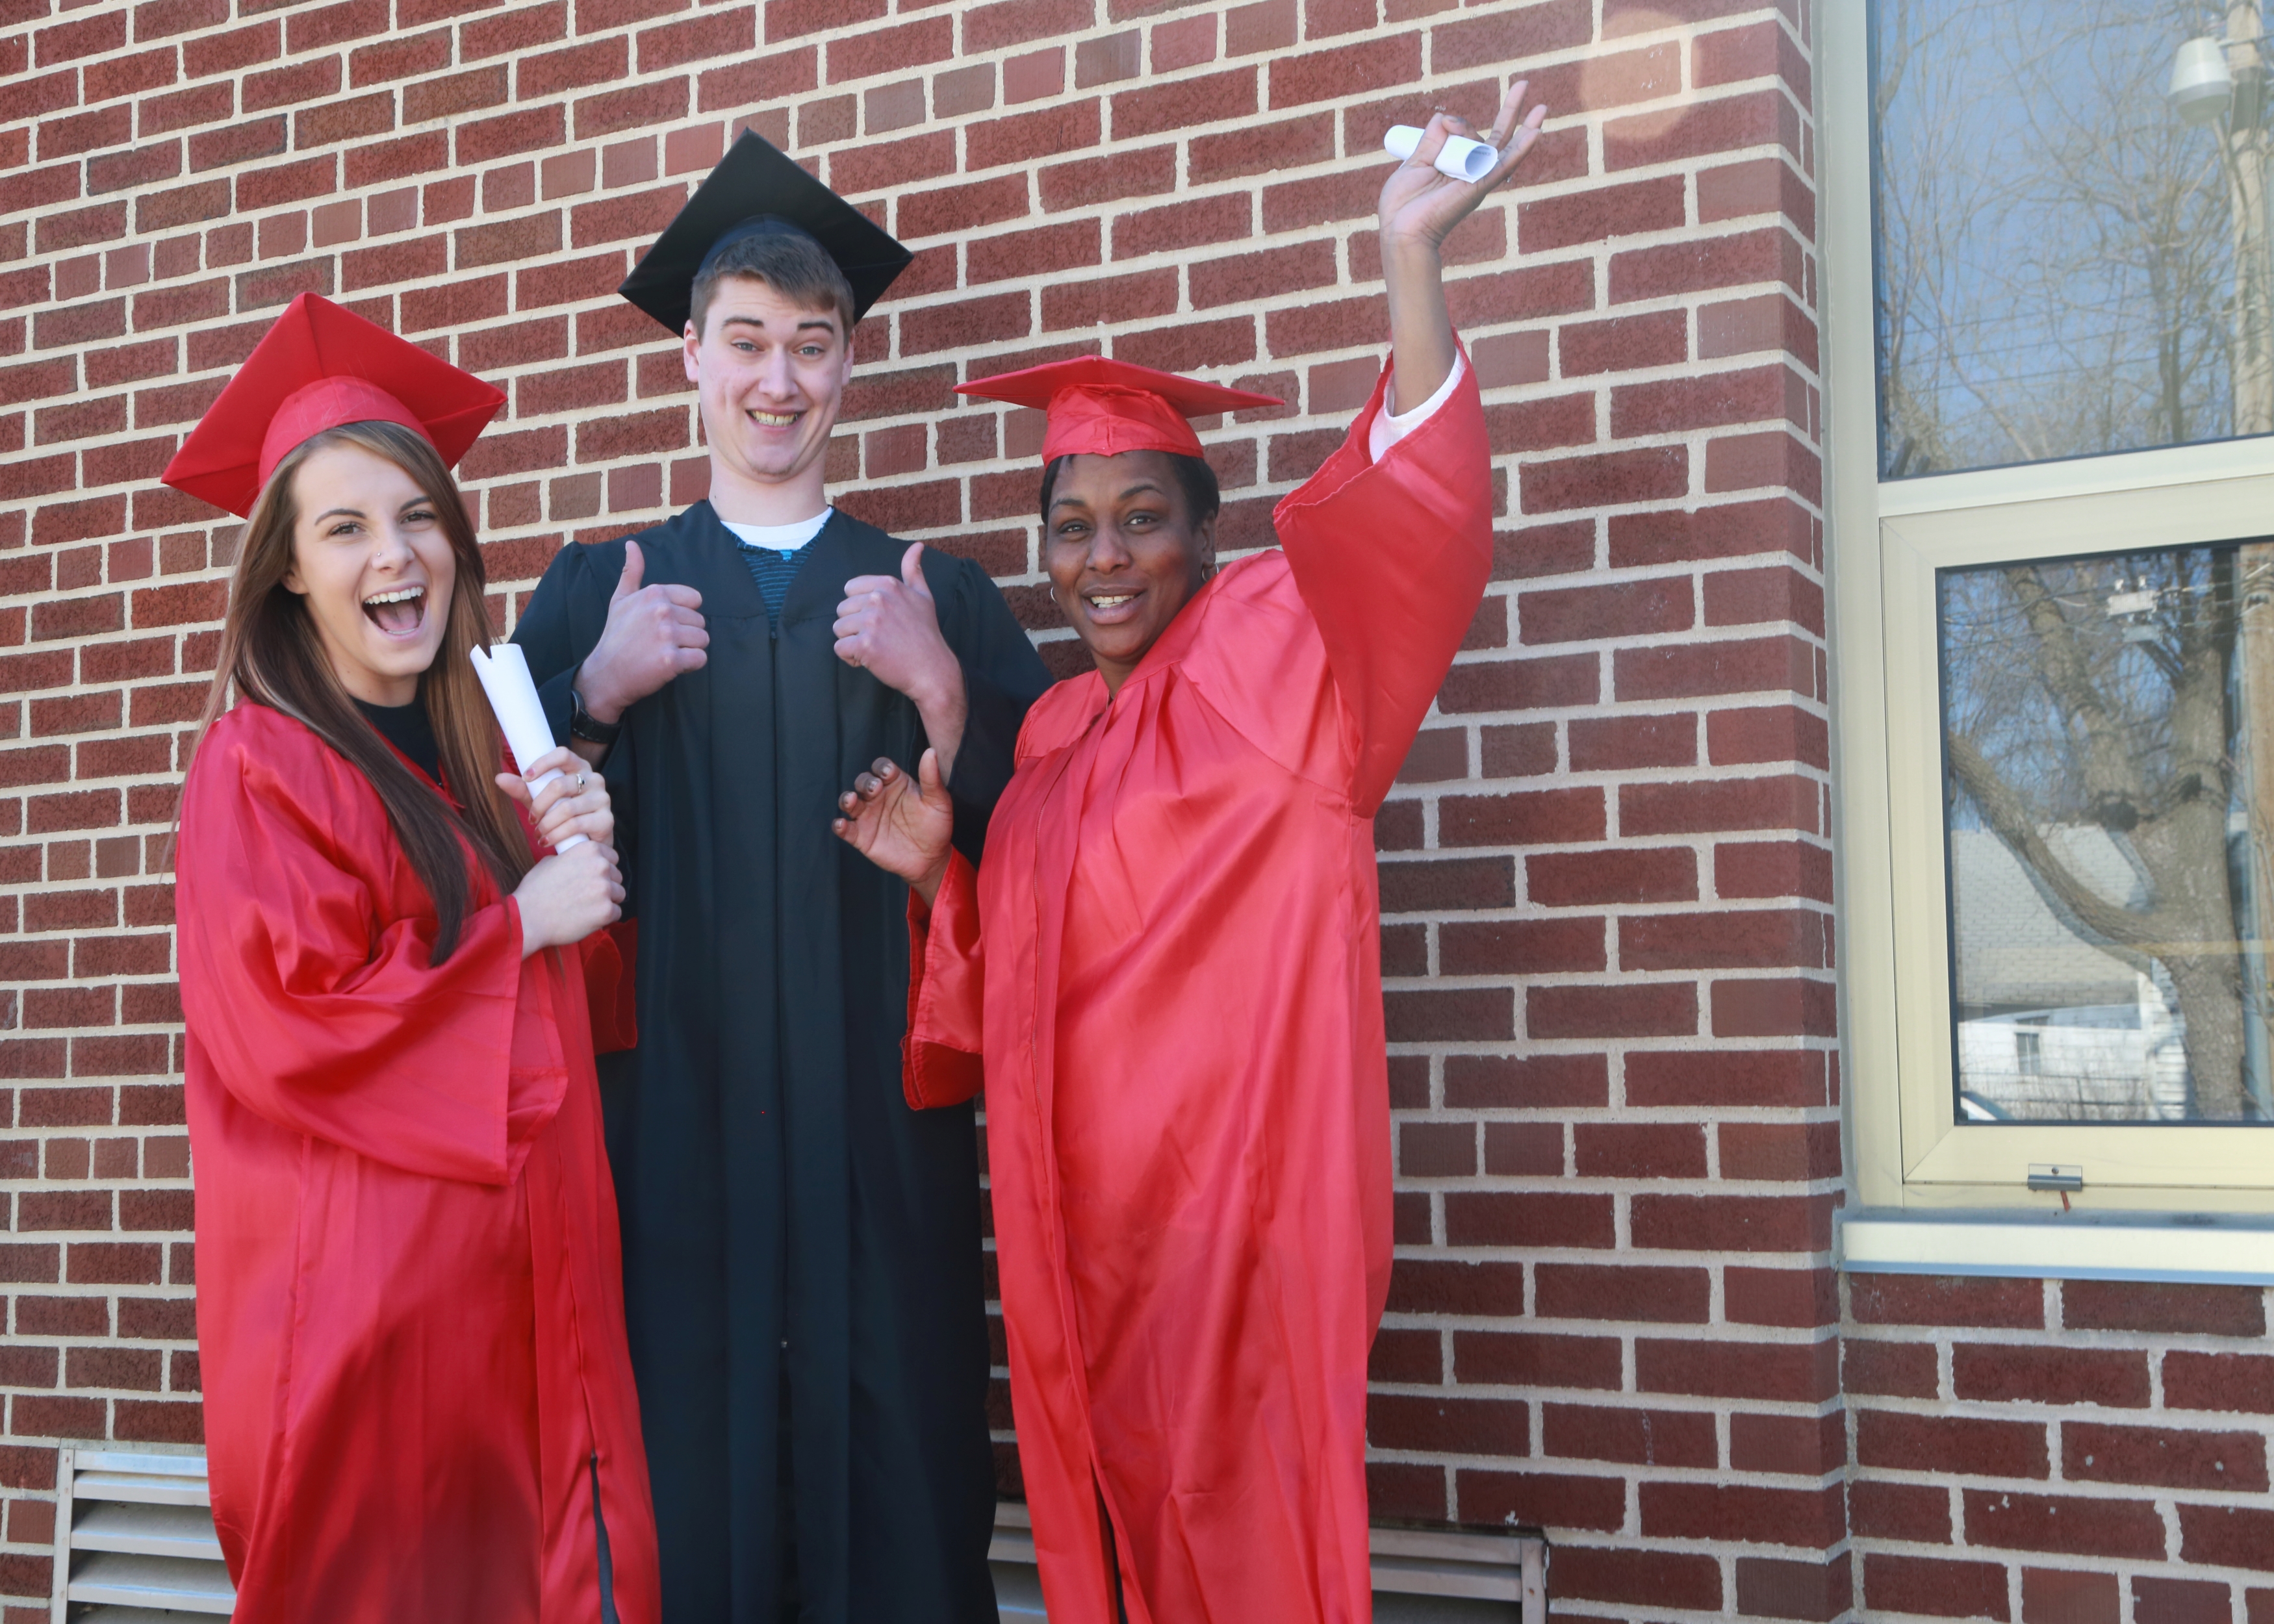 3 college graduates in cap and gown outside a brick building